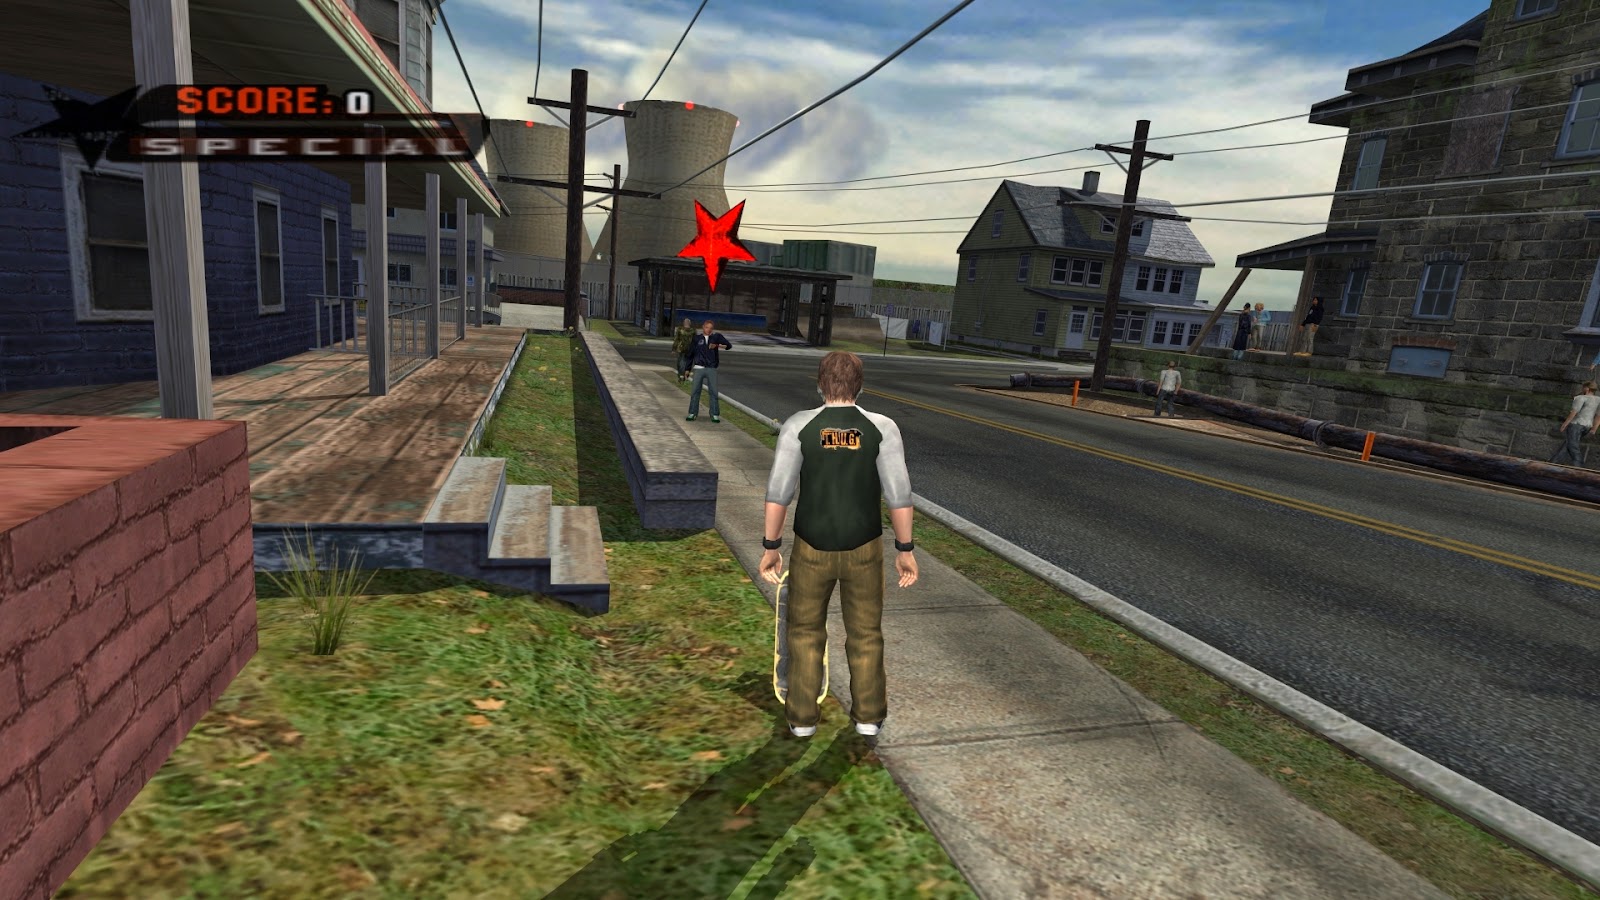 Best unlockable character ever in a video game. [Tony Hawk